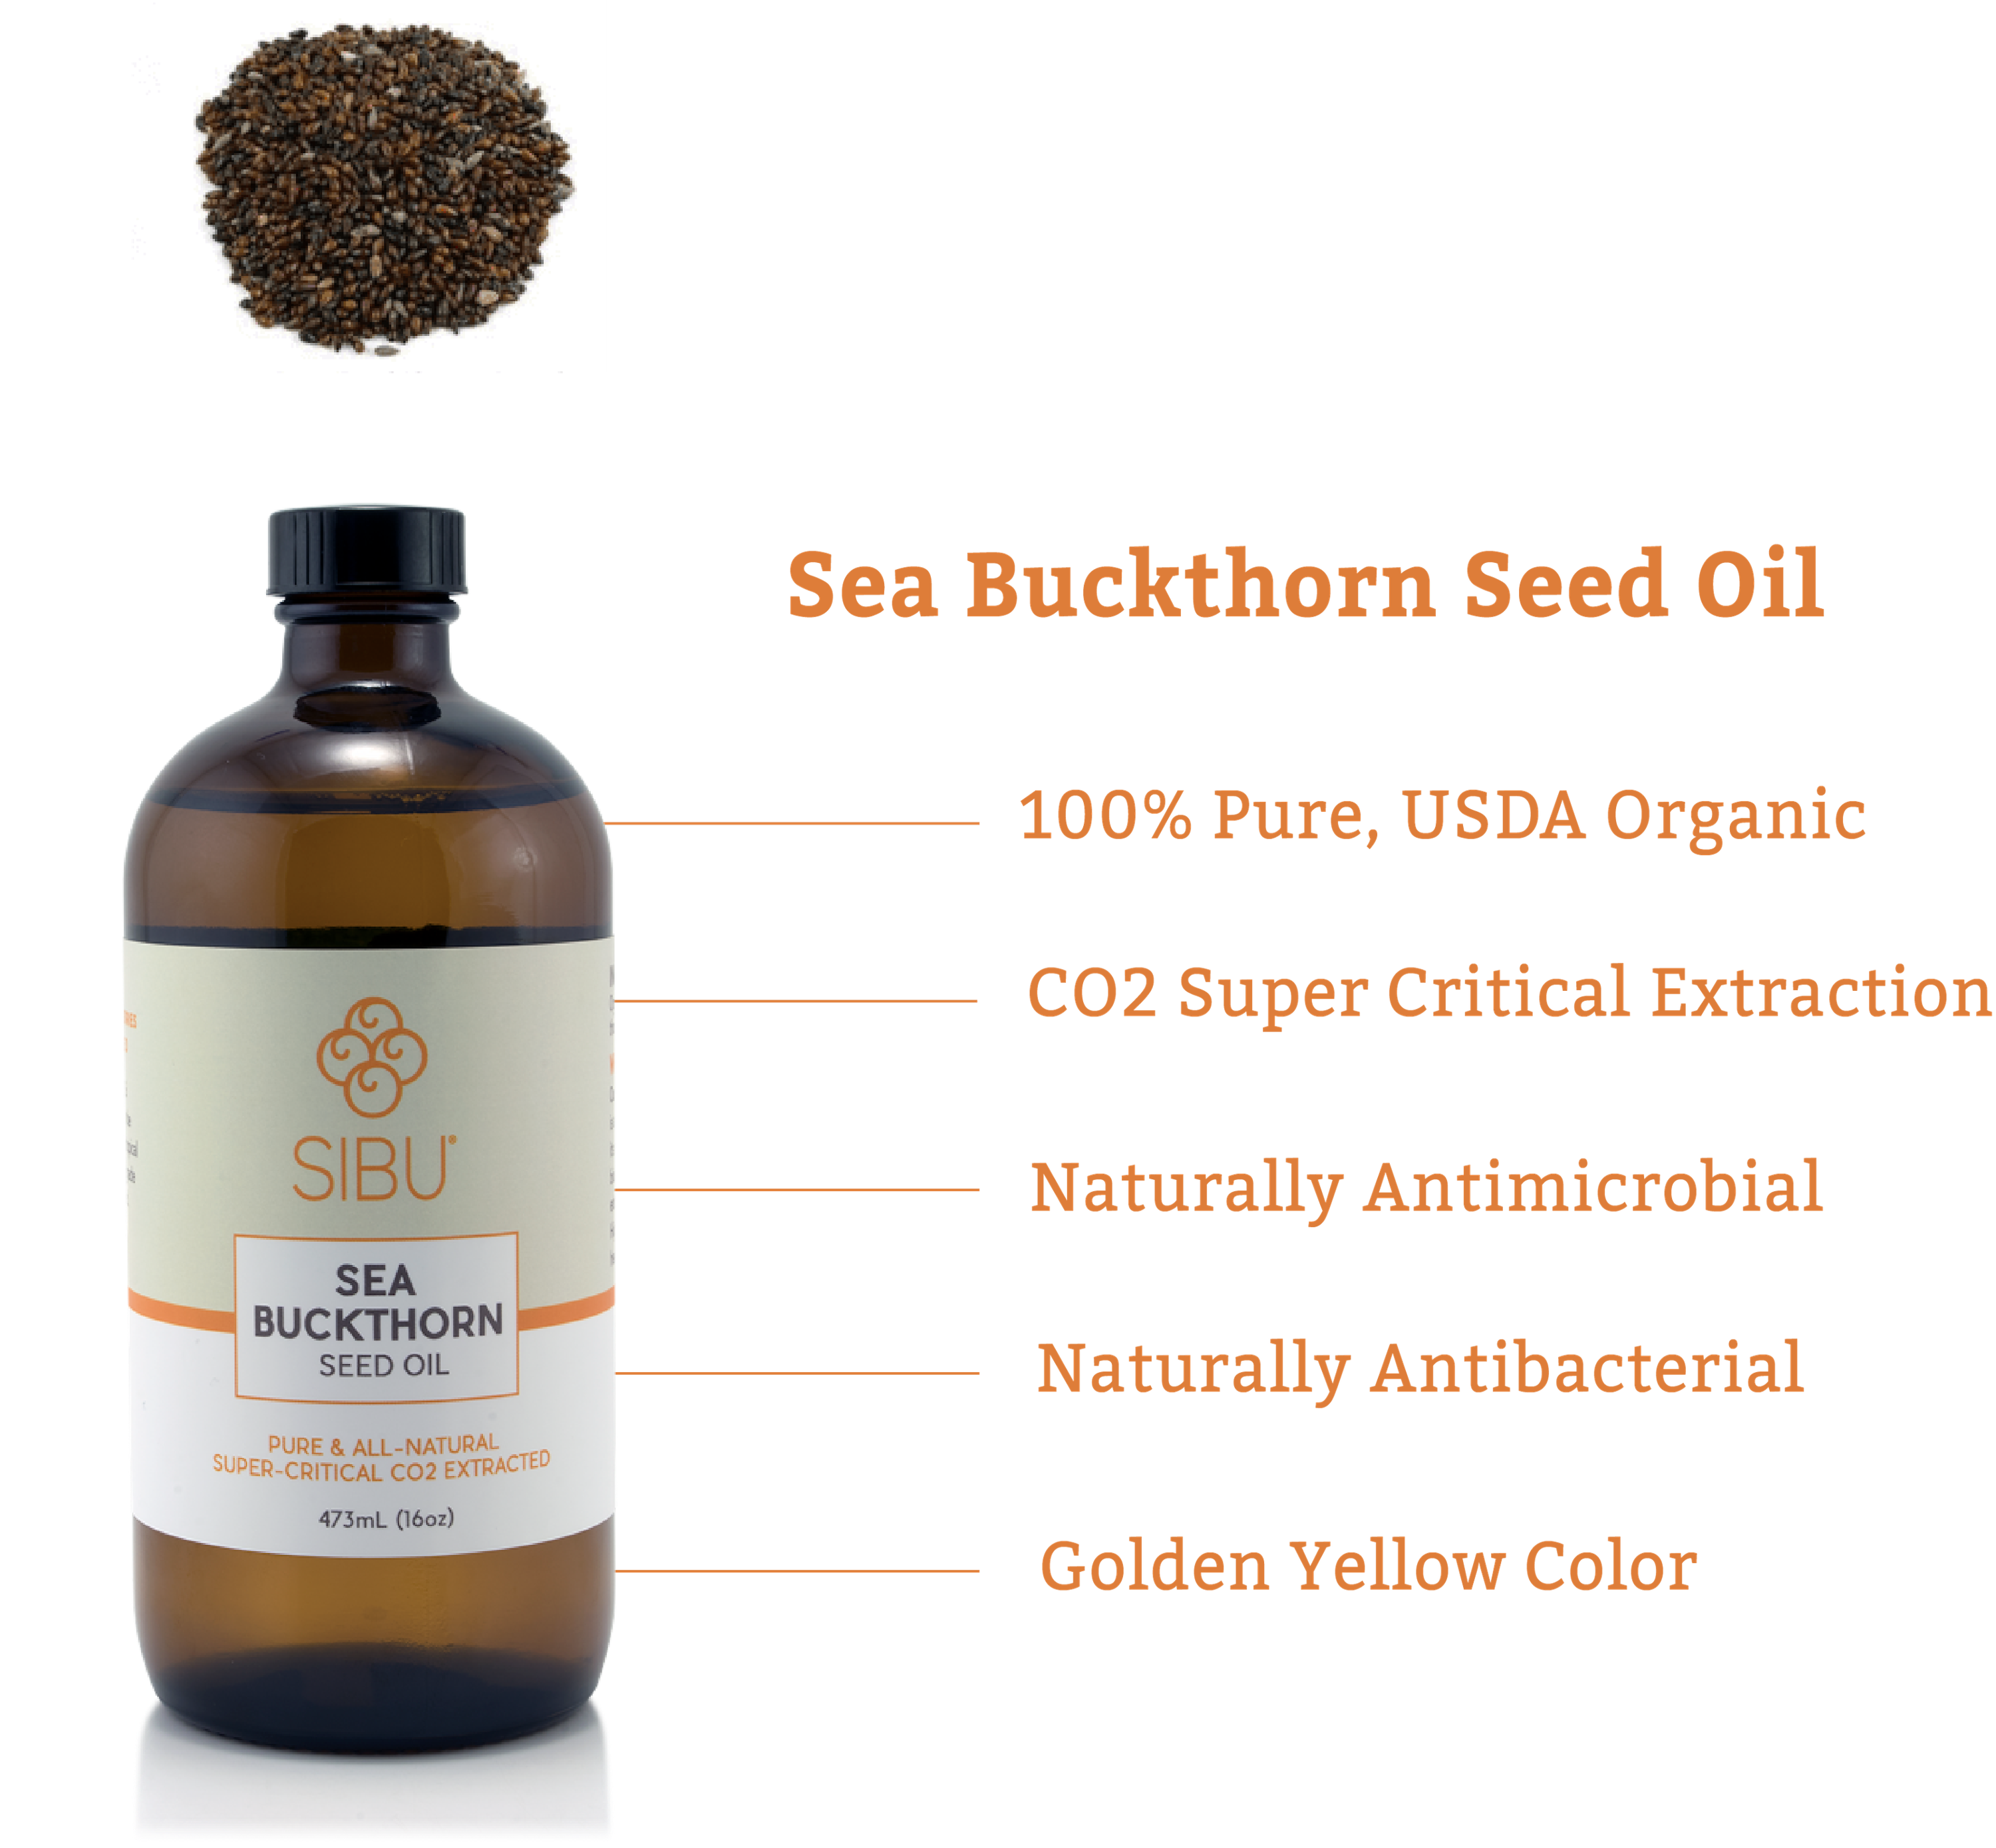 Sea Buckthorn Seed Oil - Pure & All-Natural, Super-Critical CO2 Extracted